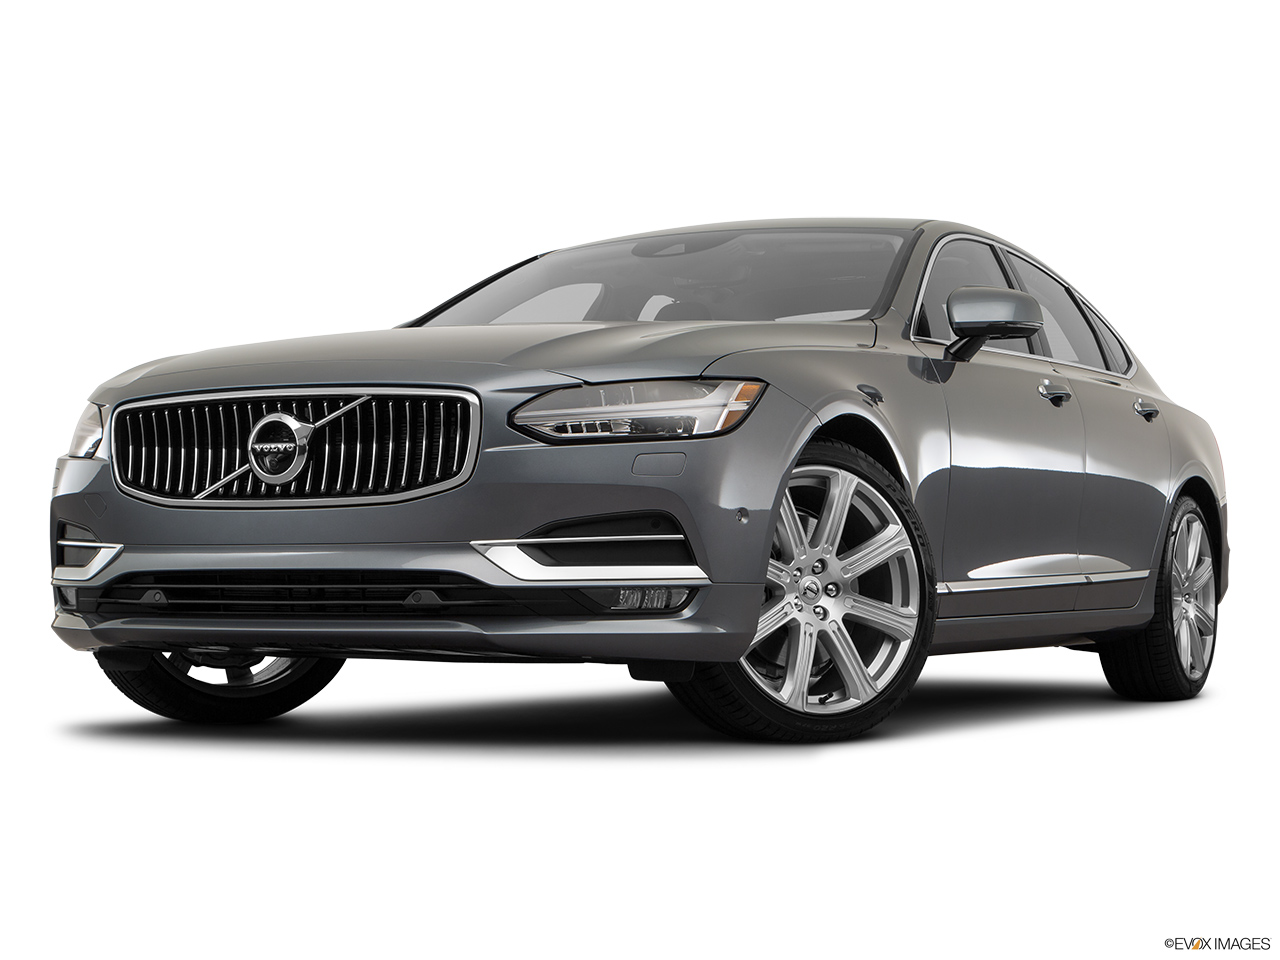 2017 Volvo S90 T6 Inscription Front angle view, low wide perspective. 